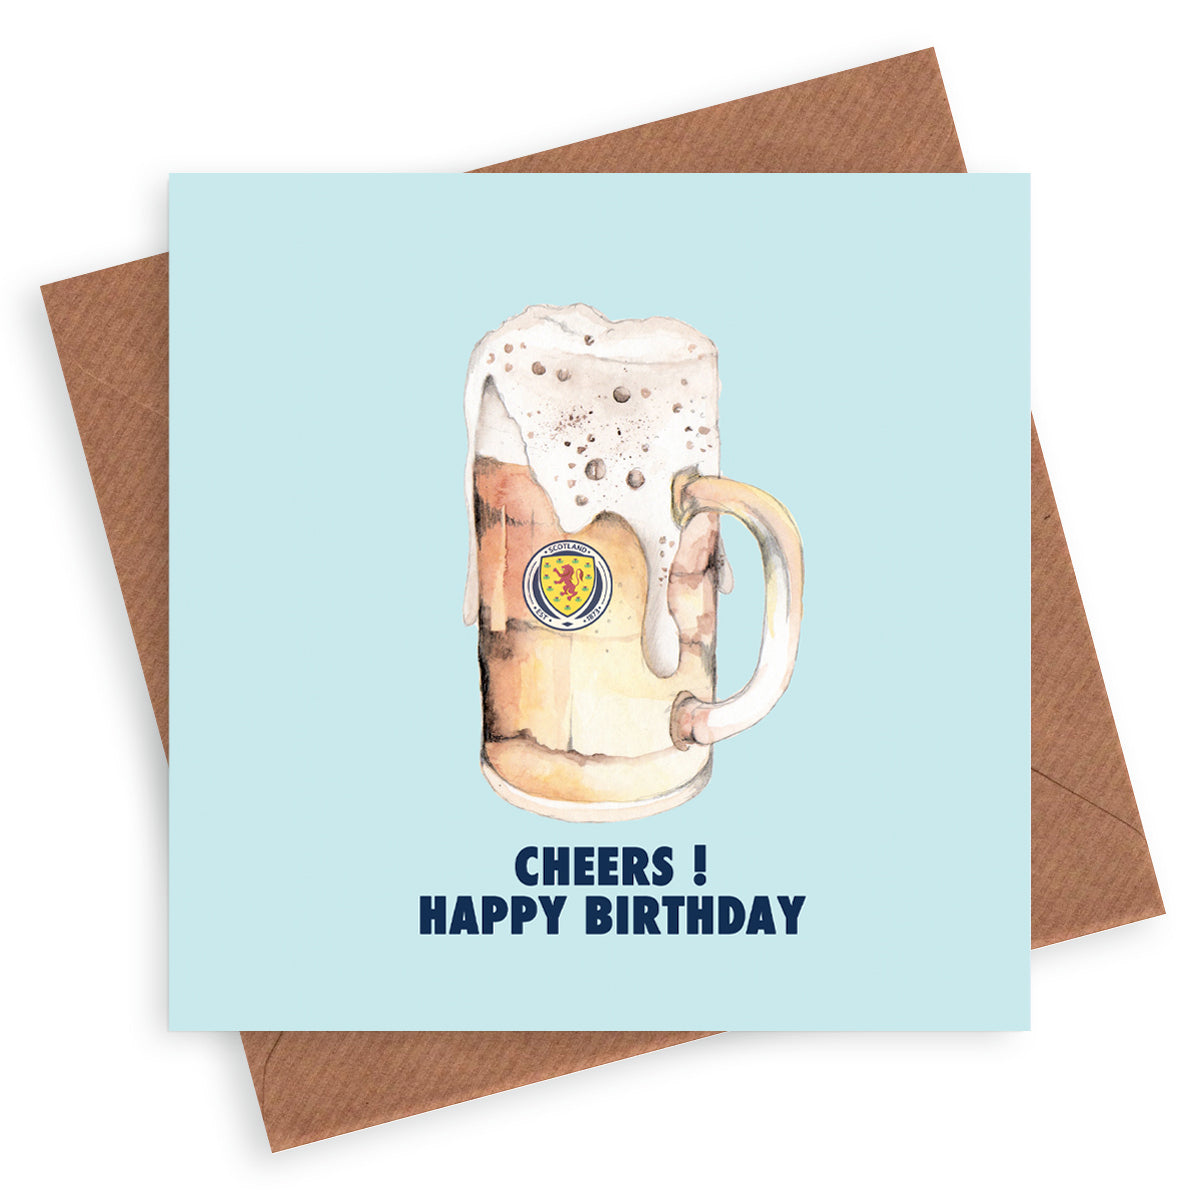 Scotland Football Anniversary Greeting Card Greeting & Note Cards Crumble and Core   